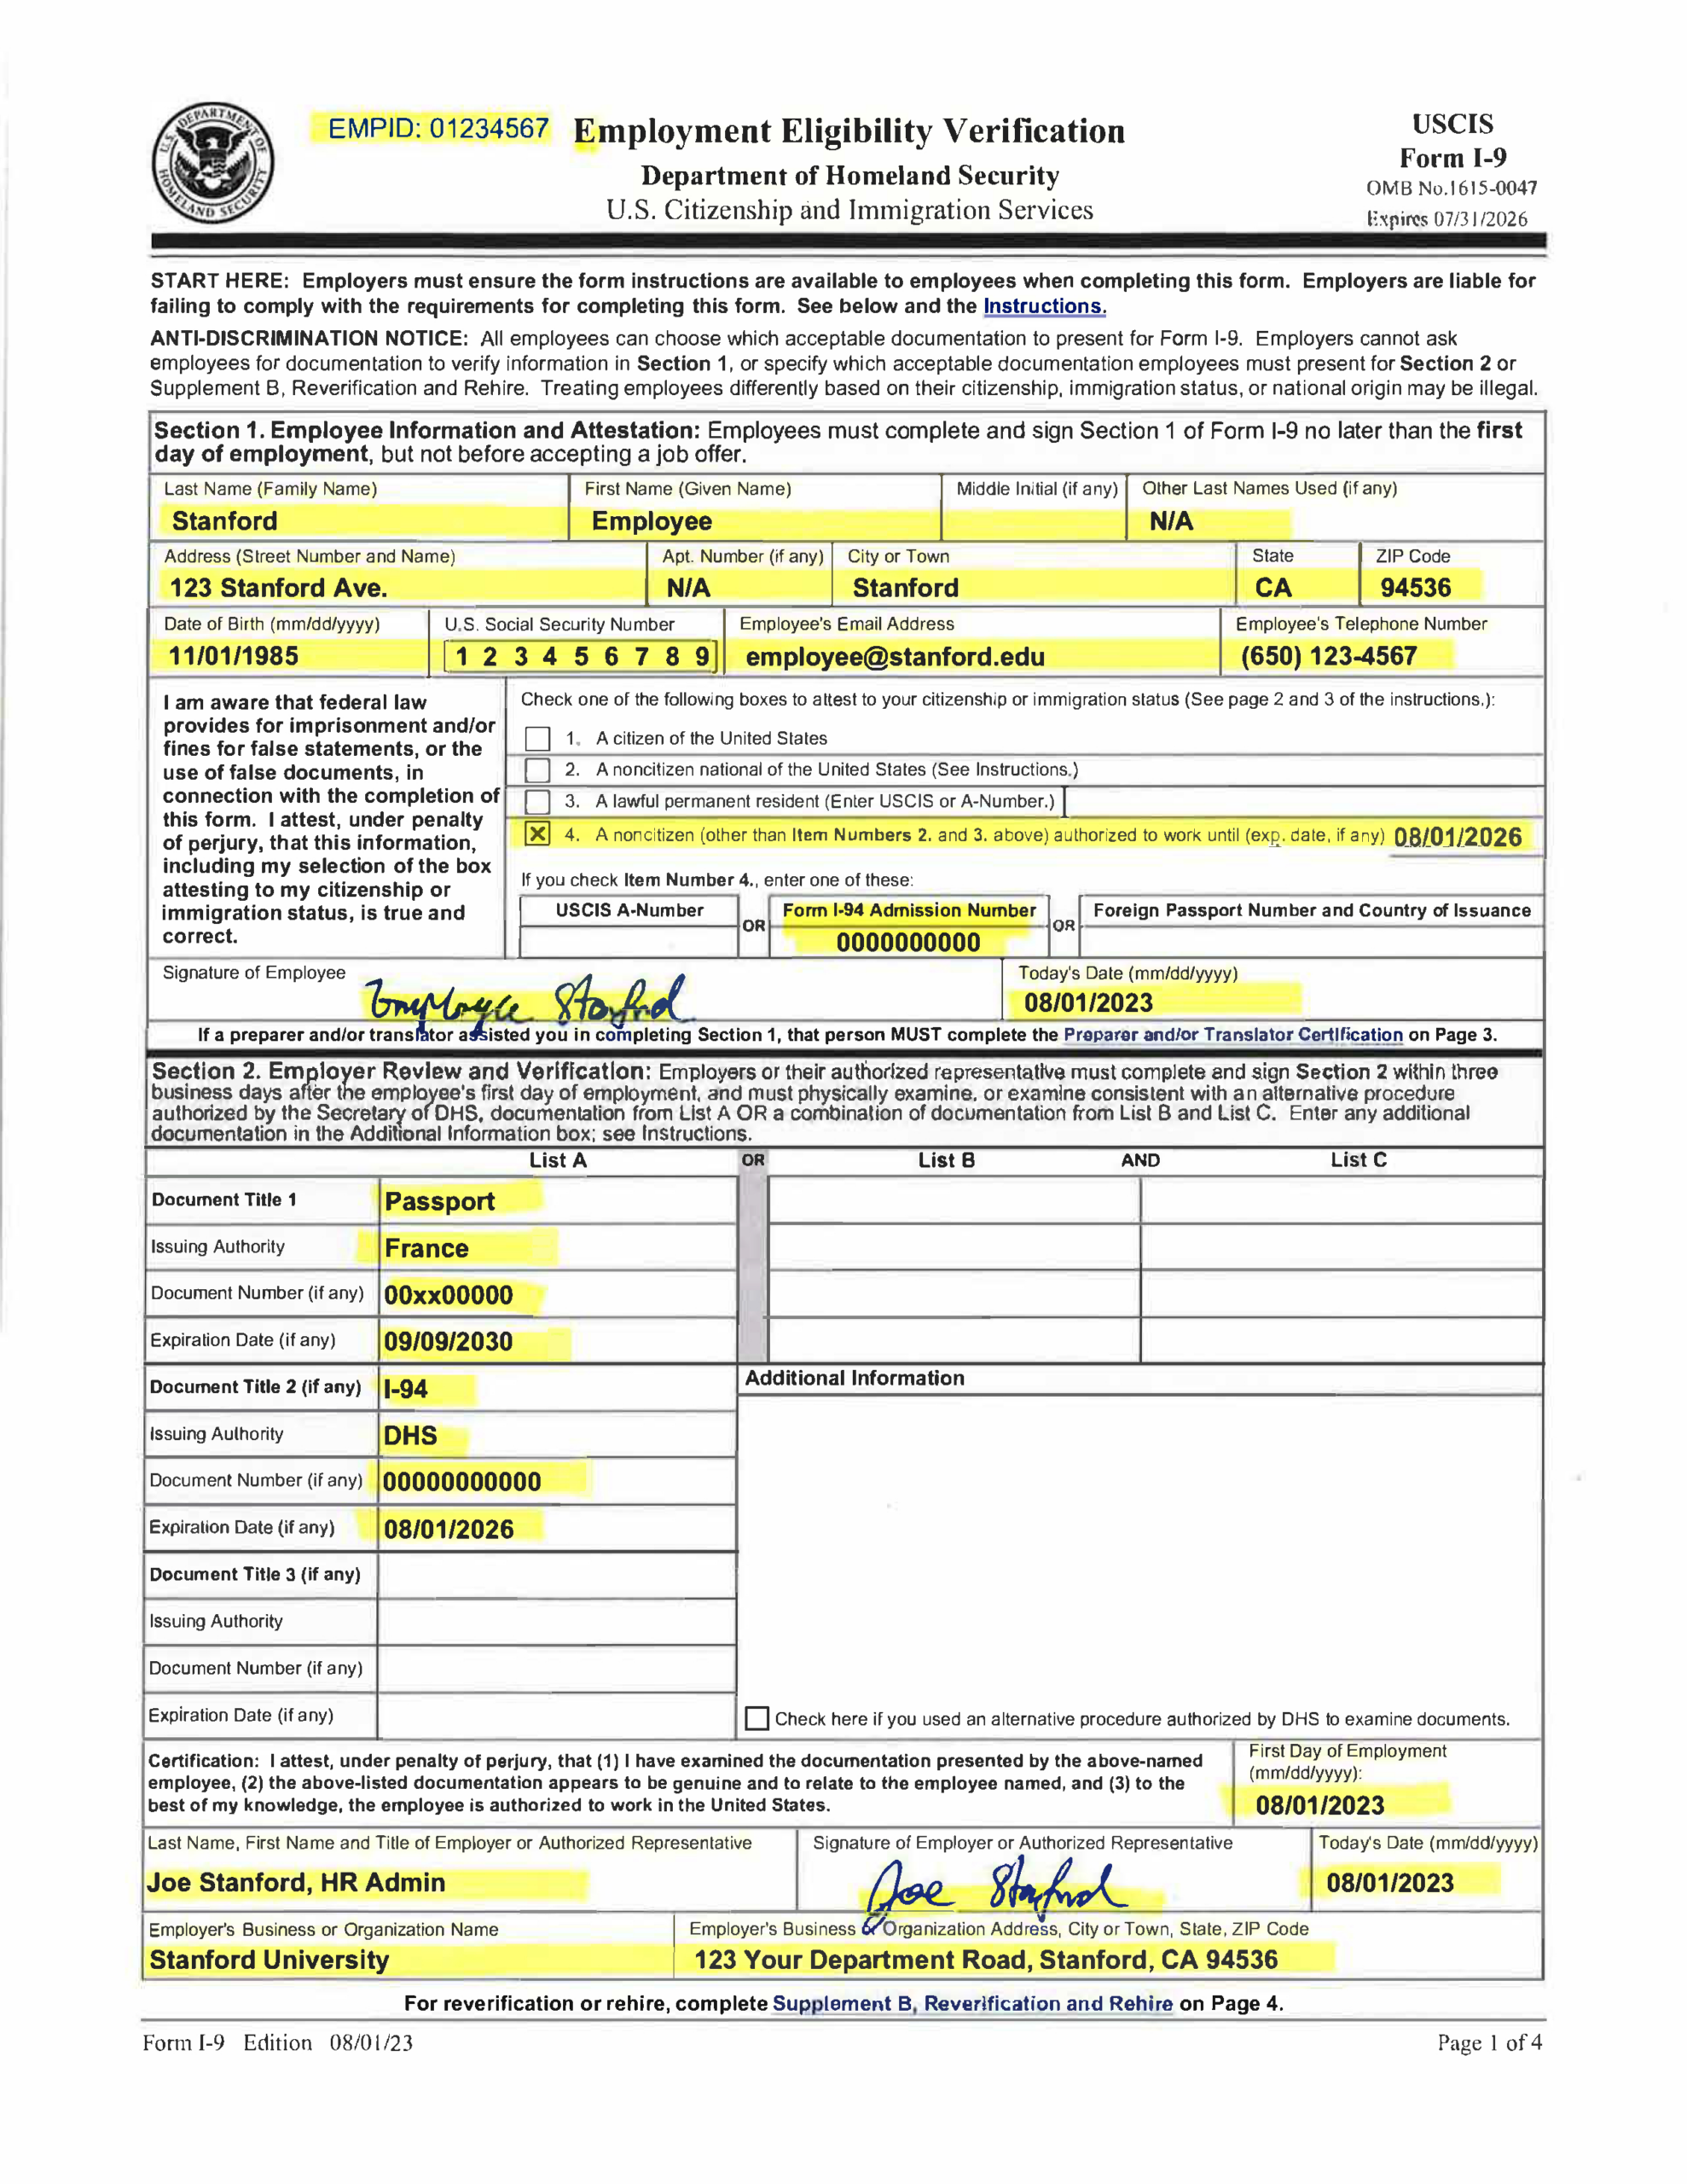 Examples Of Completed Form I-9 For Stanford with regard to Uscis I9 Form Requirements